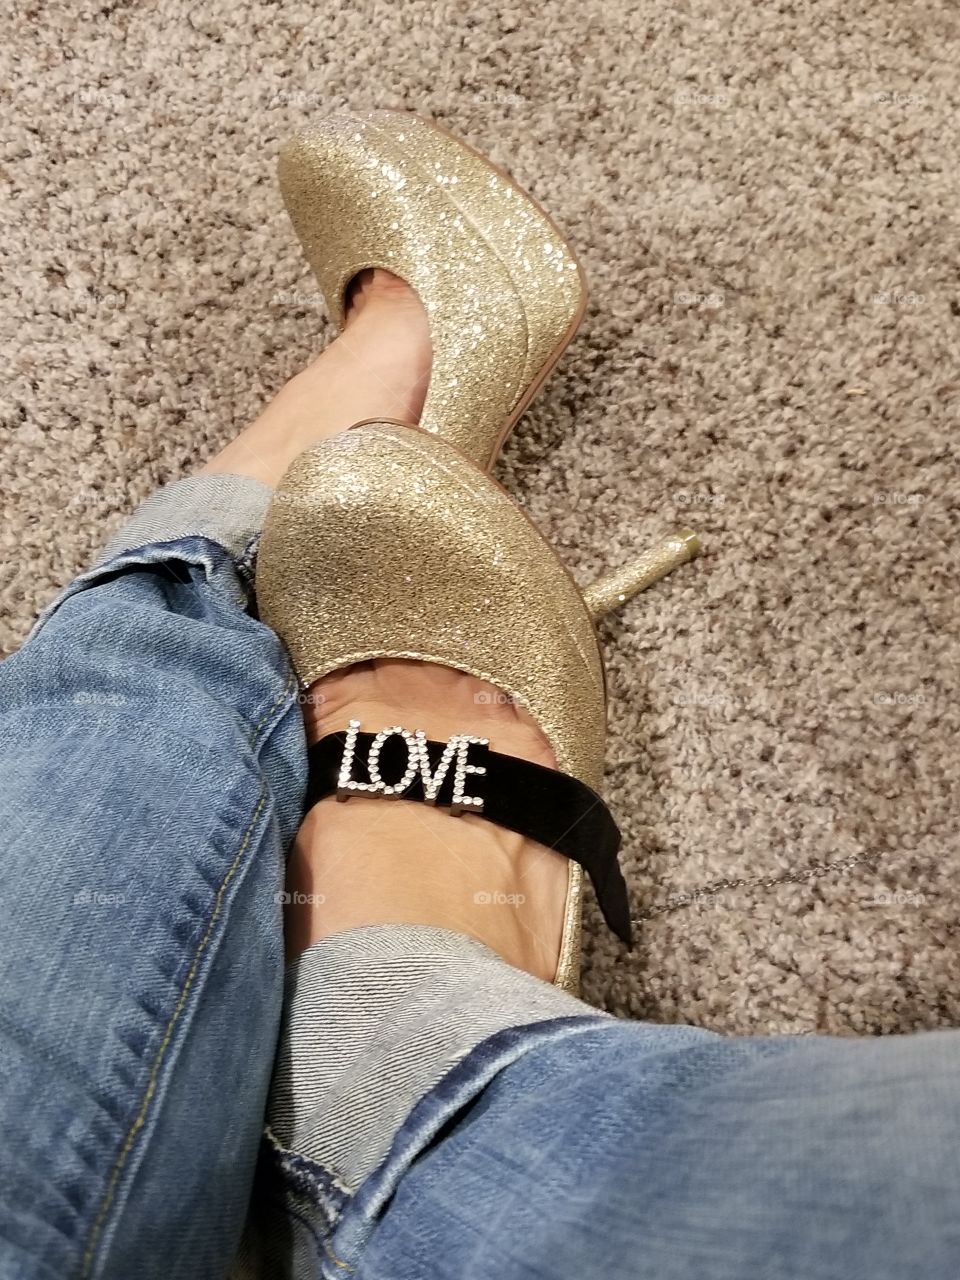 Love for the shoes!